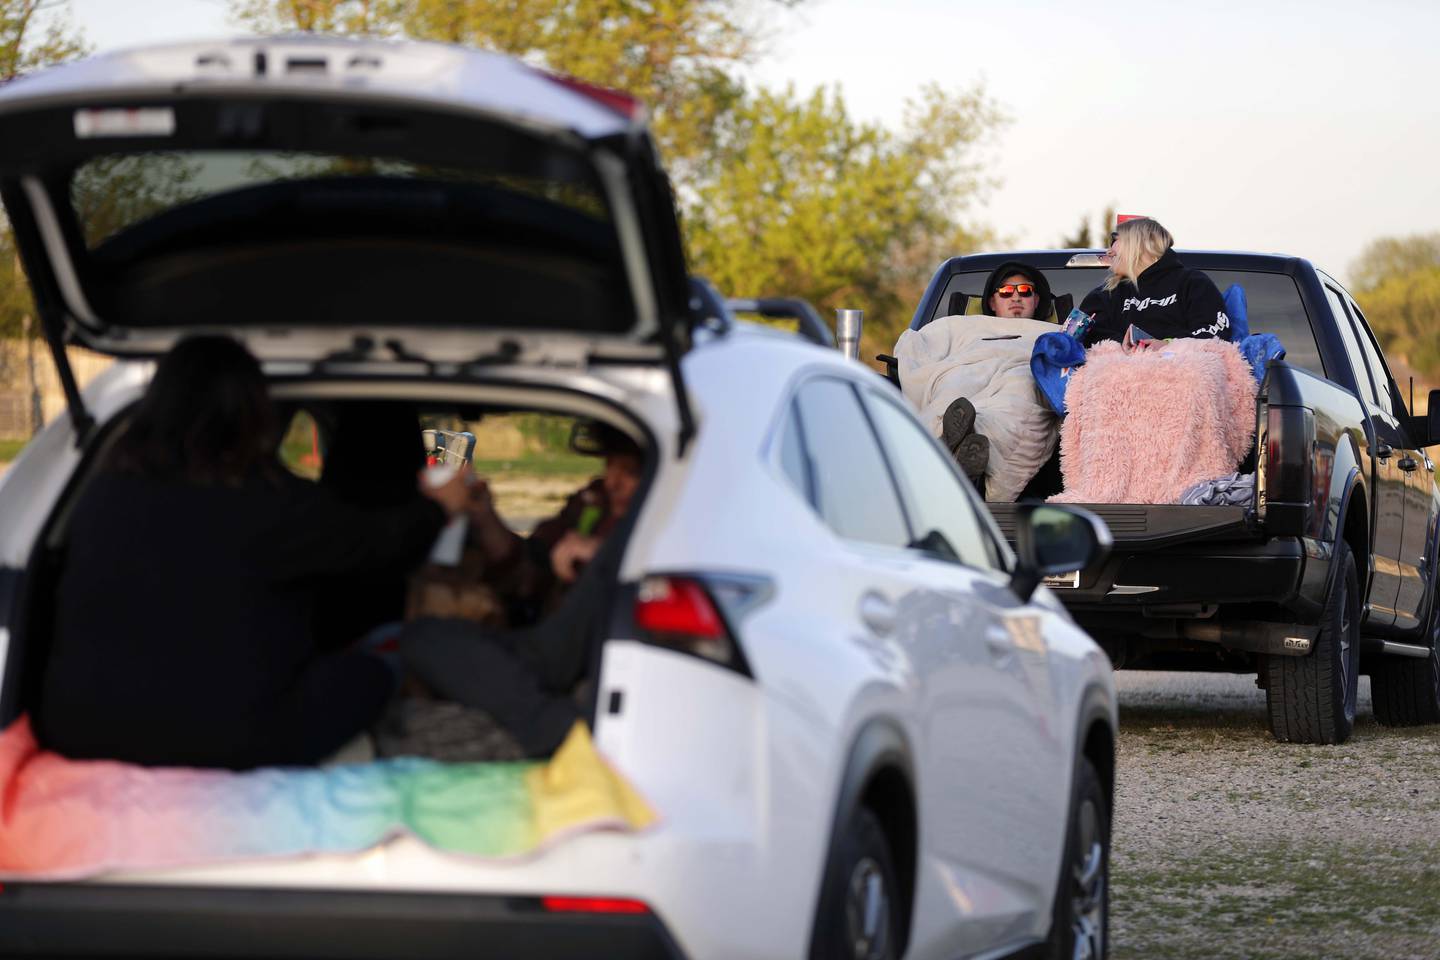 Nick Passafiume of Lake Zurich and Amber Wells of McHenry were all bundled up at McHenry Outdoor Theater when it reopened Friday April 30, 2021, as they settled into the bed of their truck waiting for the sun to drop to watch the double feature. Both said the last film they saw together at the drive-in was "The Breakfast Club" last year.